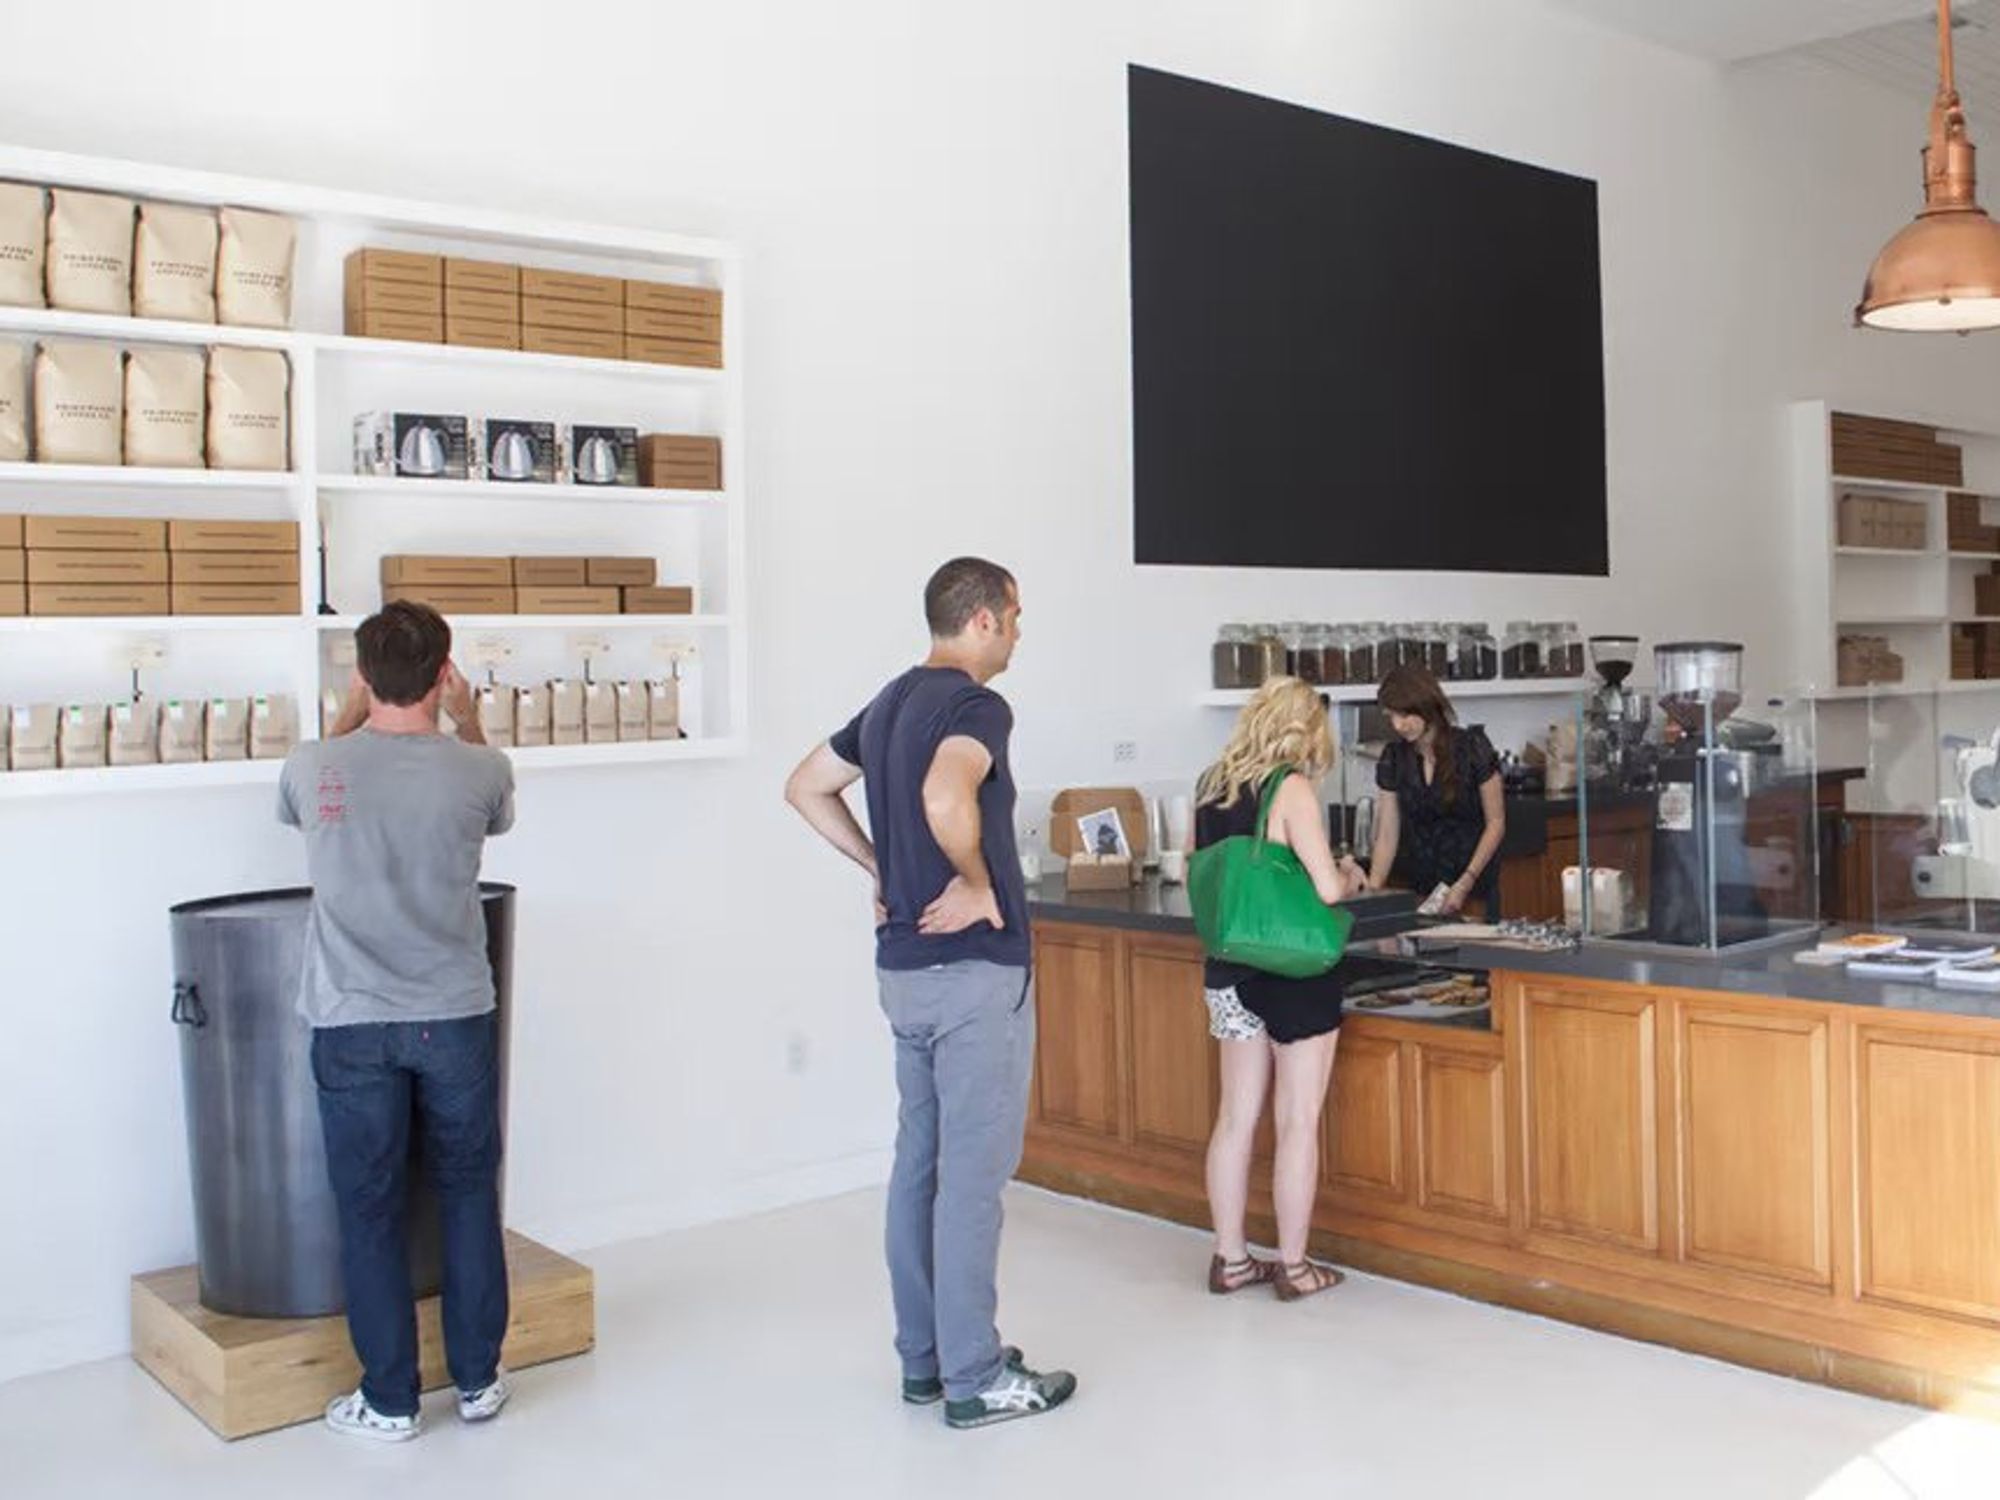 ☕️ Top Cafes For Running into LA's Tech Leaders